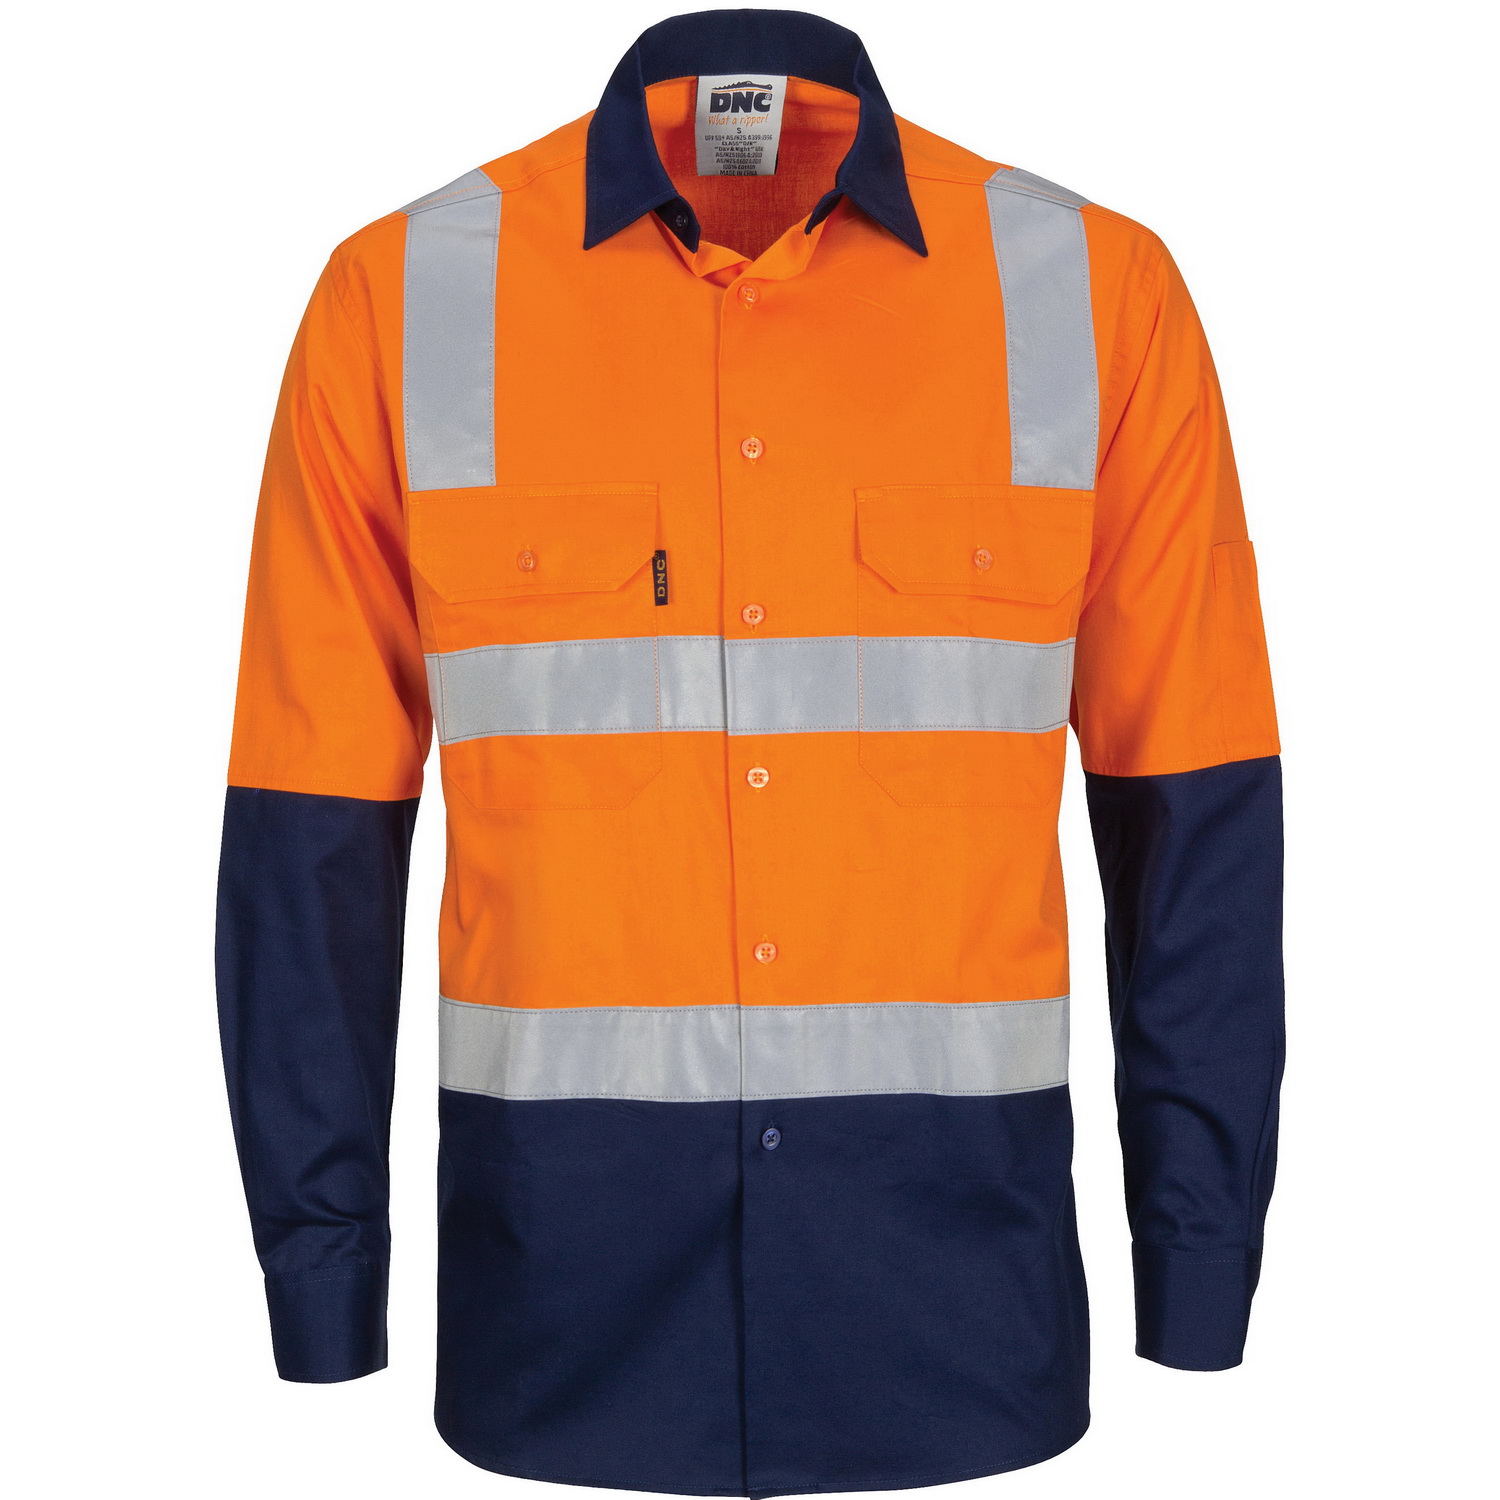 Product Display - DNC Workwear - workwear, work wear, clothing, winter  wear, polo shirts, corporate clothing